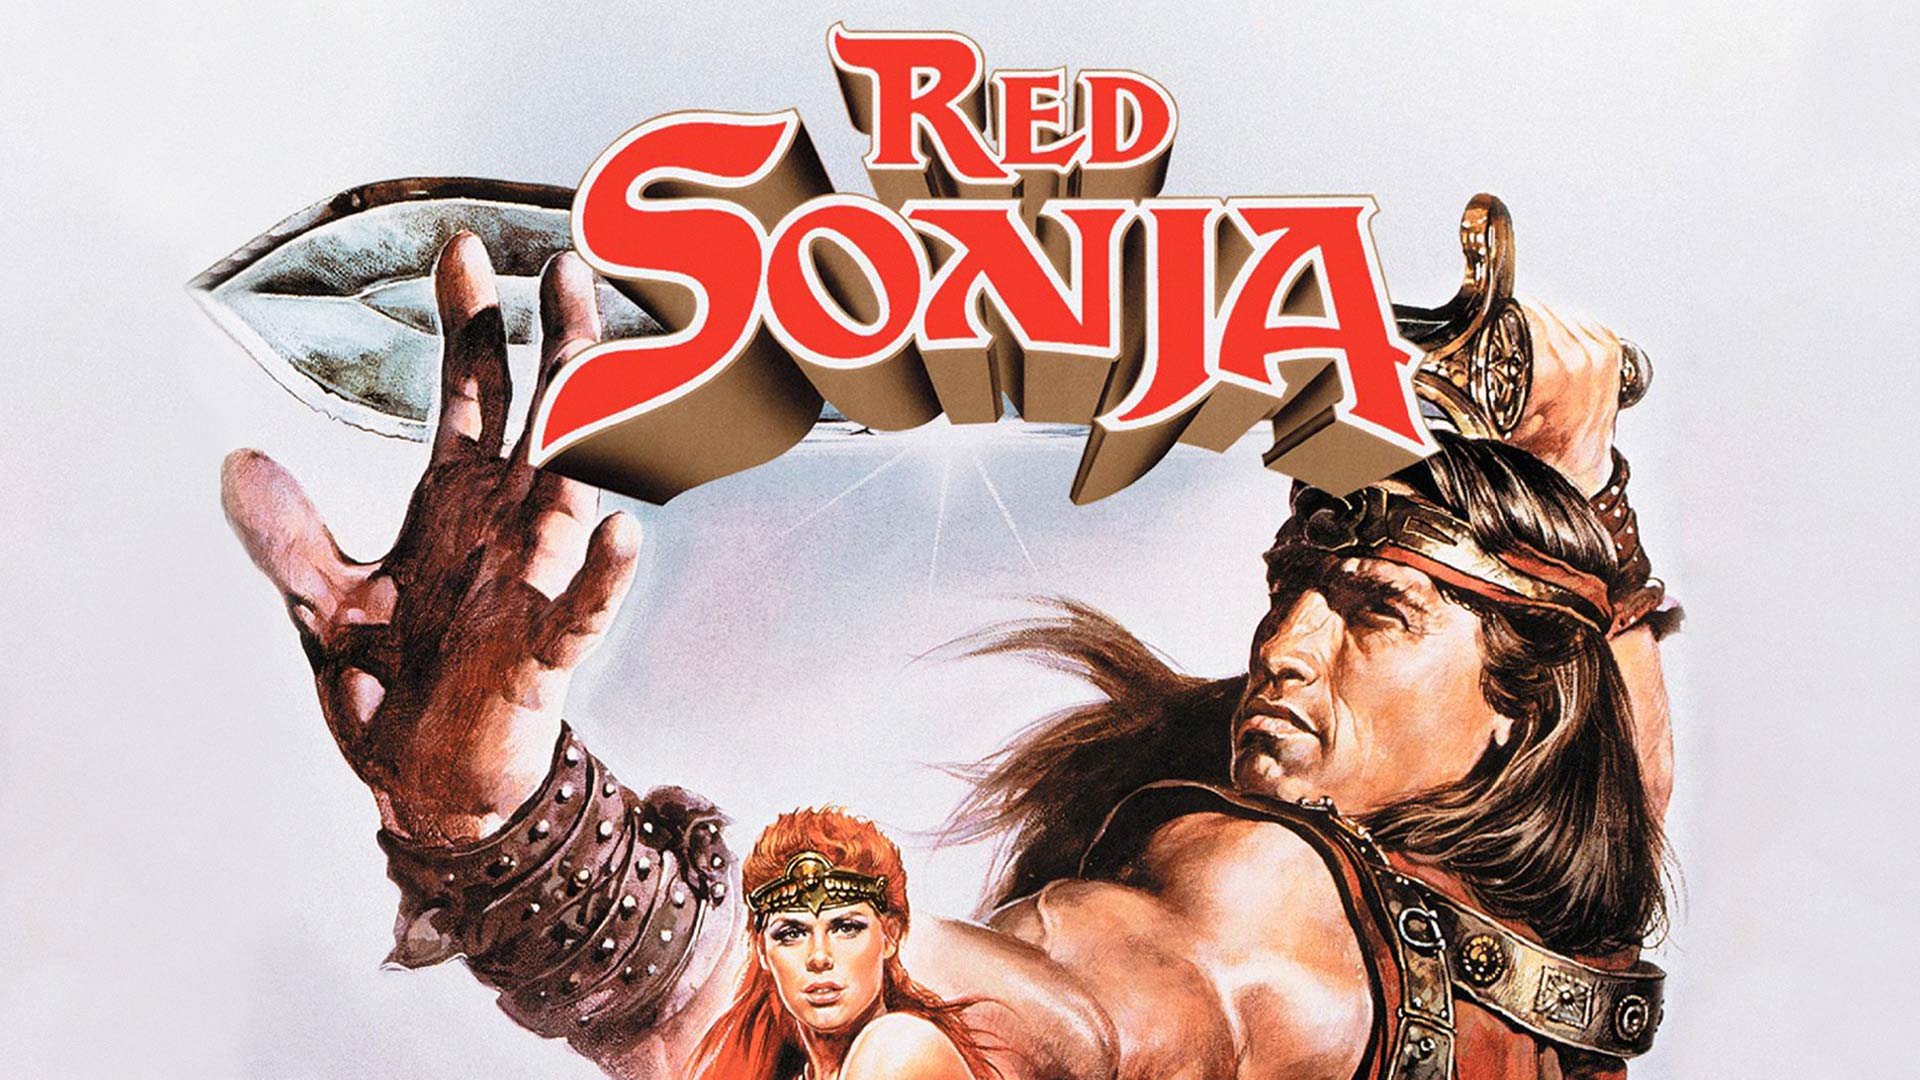 37-facts-about-the-movie-red-sonja